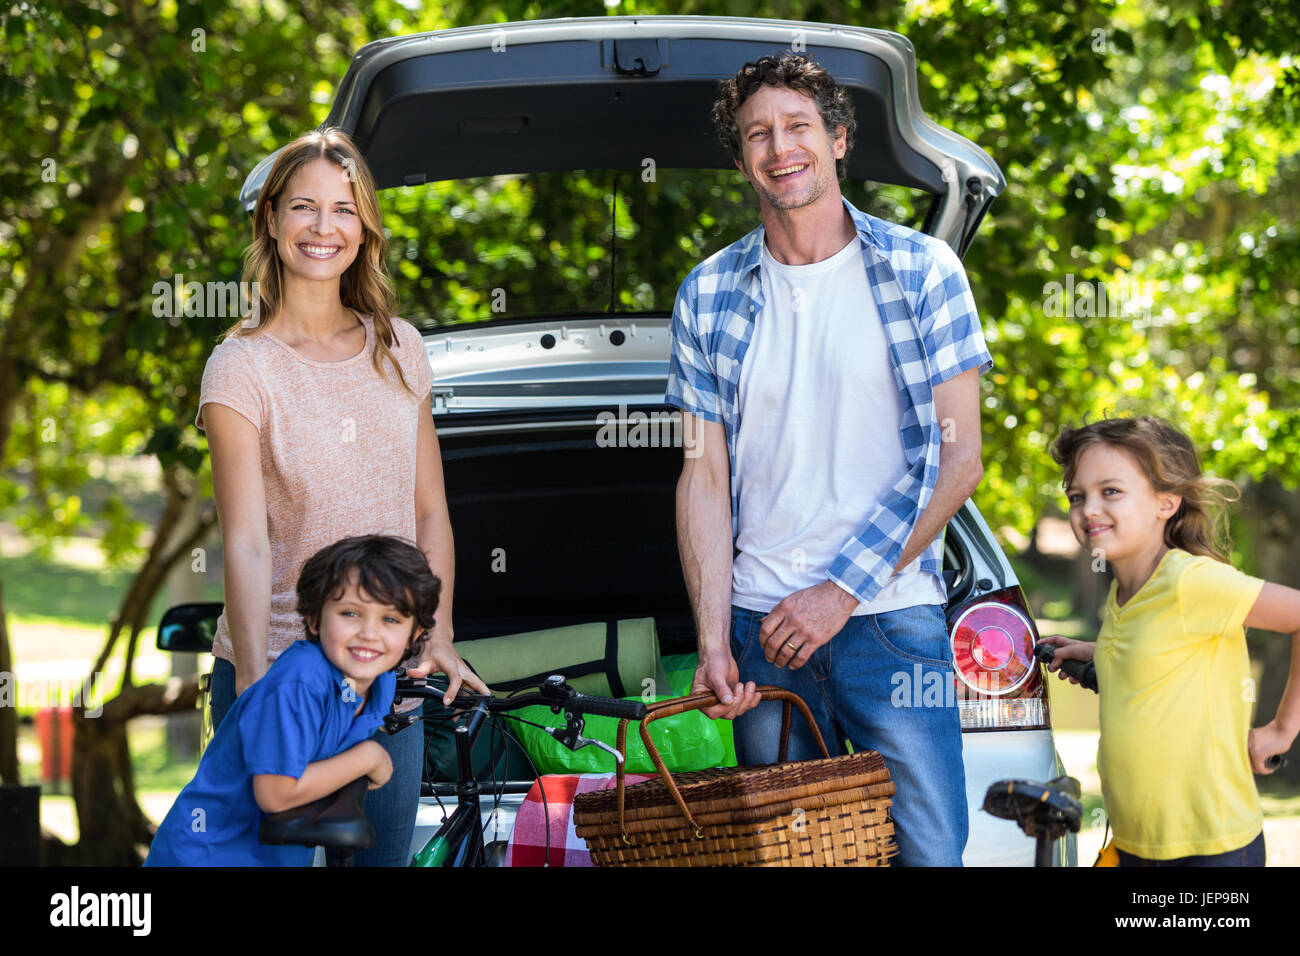 Smiling family in front of a car Stock Photo